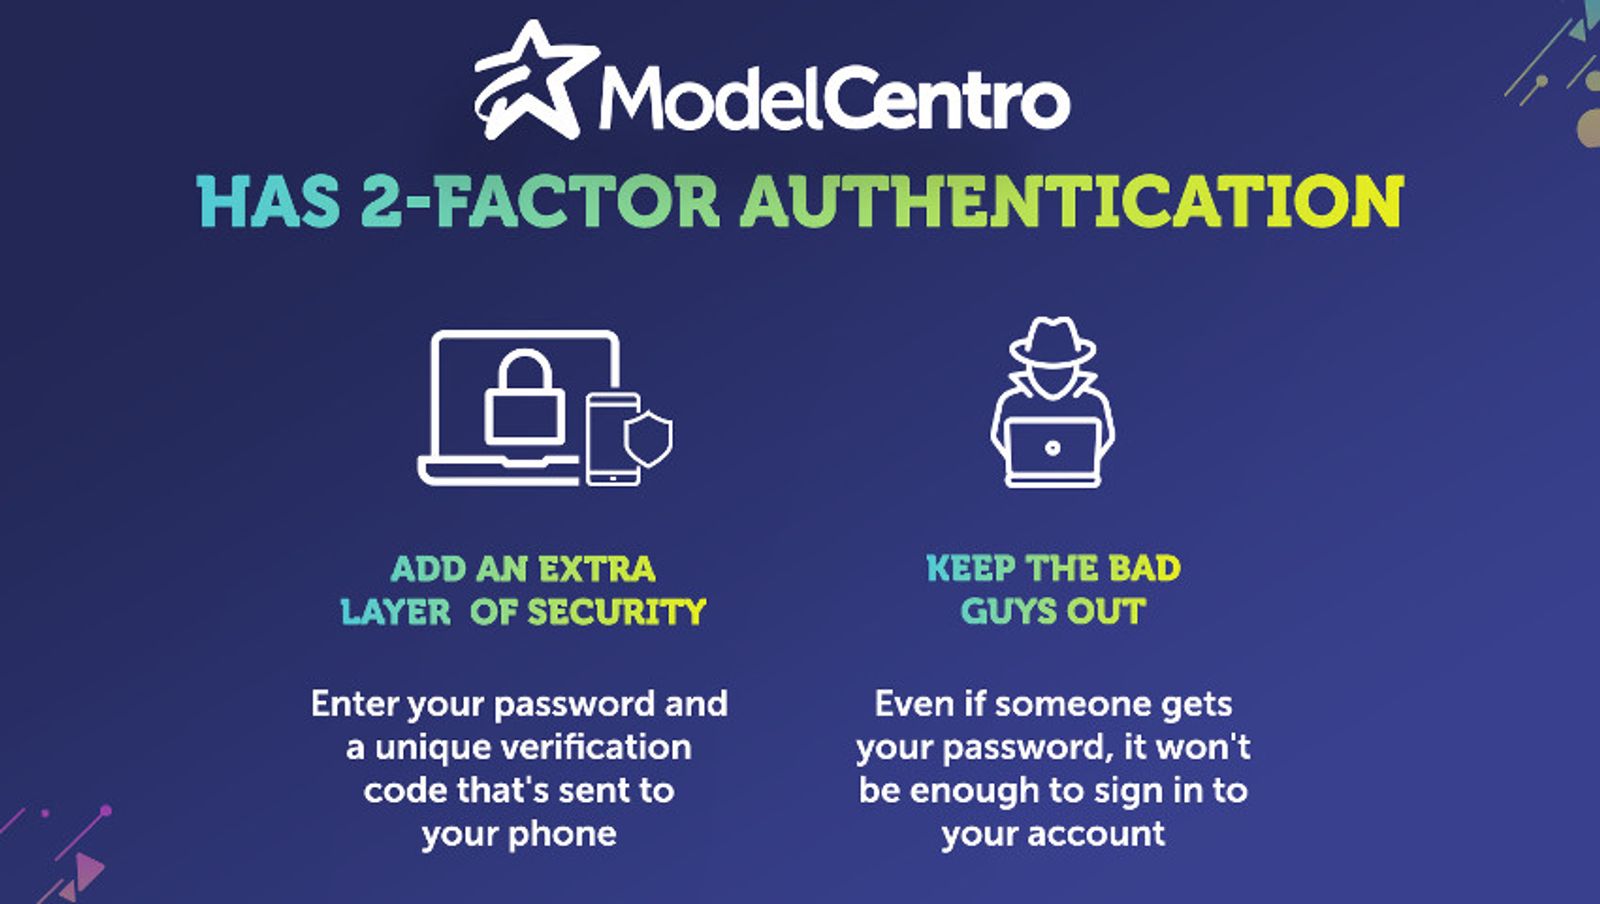 ModelCentro Implements 2-Step Verification